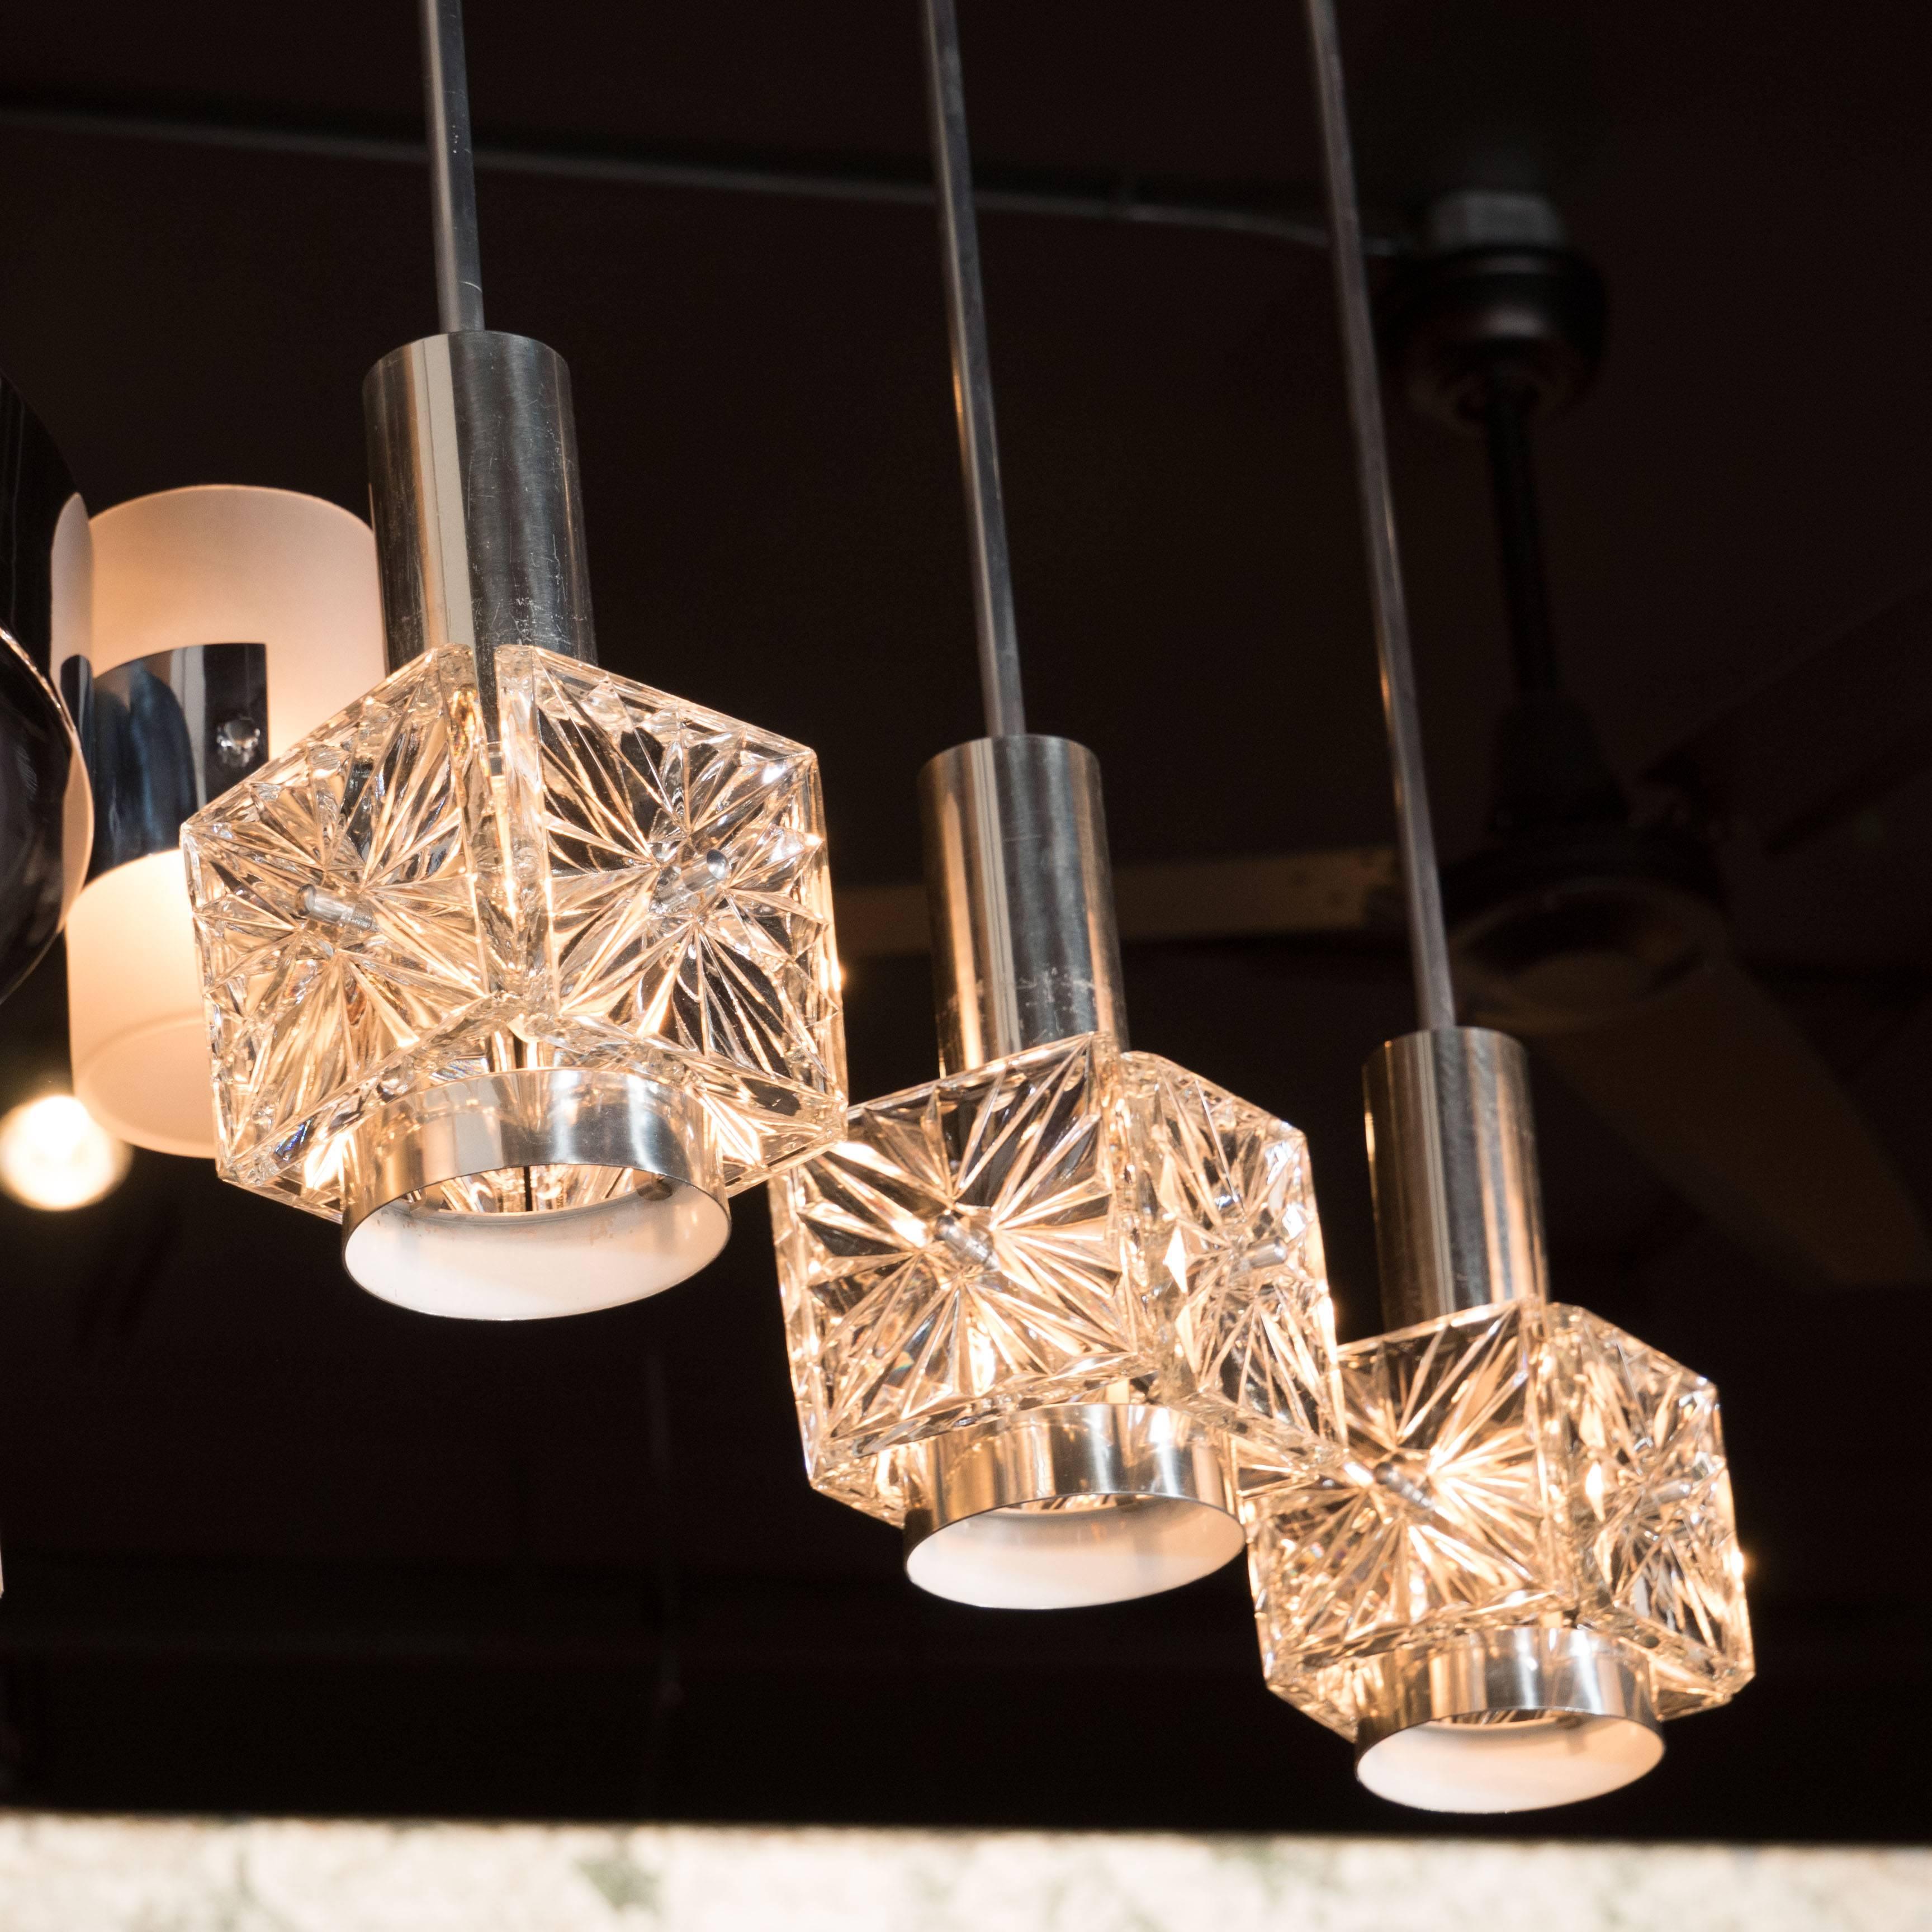 A set of three Mid-Century Modernist etched glass pendant chandelier in the style of Kinkeldy with chromed fittings. This chandelier features three downward hanging shades that each consist of faceted crystal squares with a hand-cut diamond pattern.